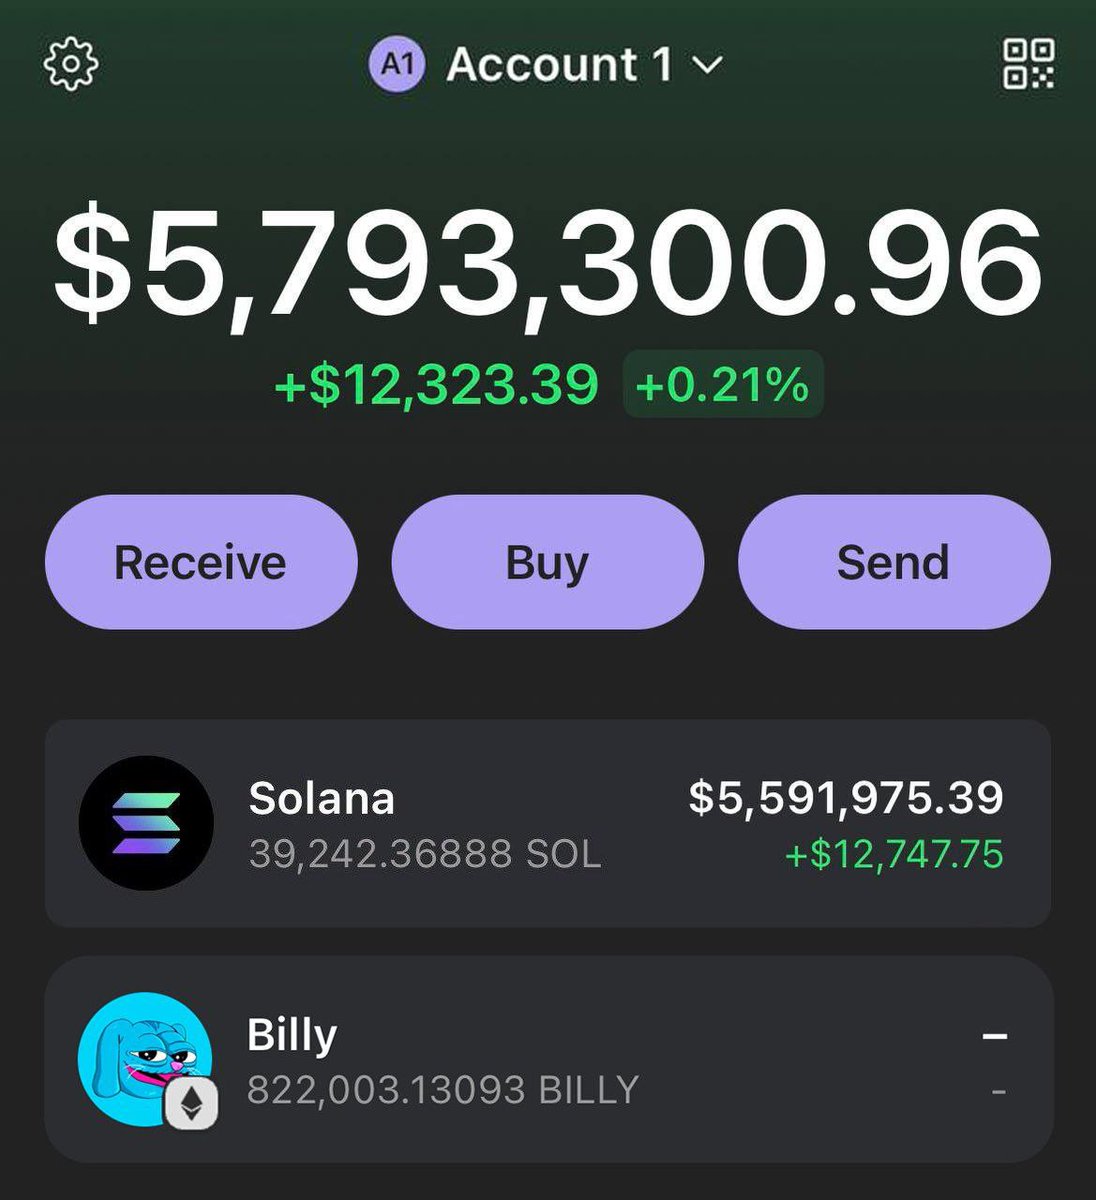 I made over $5,000,000 trading memecoins this month.

To celebrate I’m GIVING AWAY $2,000 SOL to try help some people out

To enter: Like, RT and comment address

Many keep asking me for my next play, I just found @BillyBaseCoin, its a new project that just opened their airdrop…